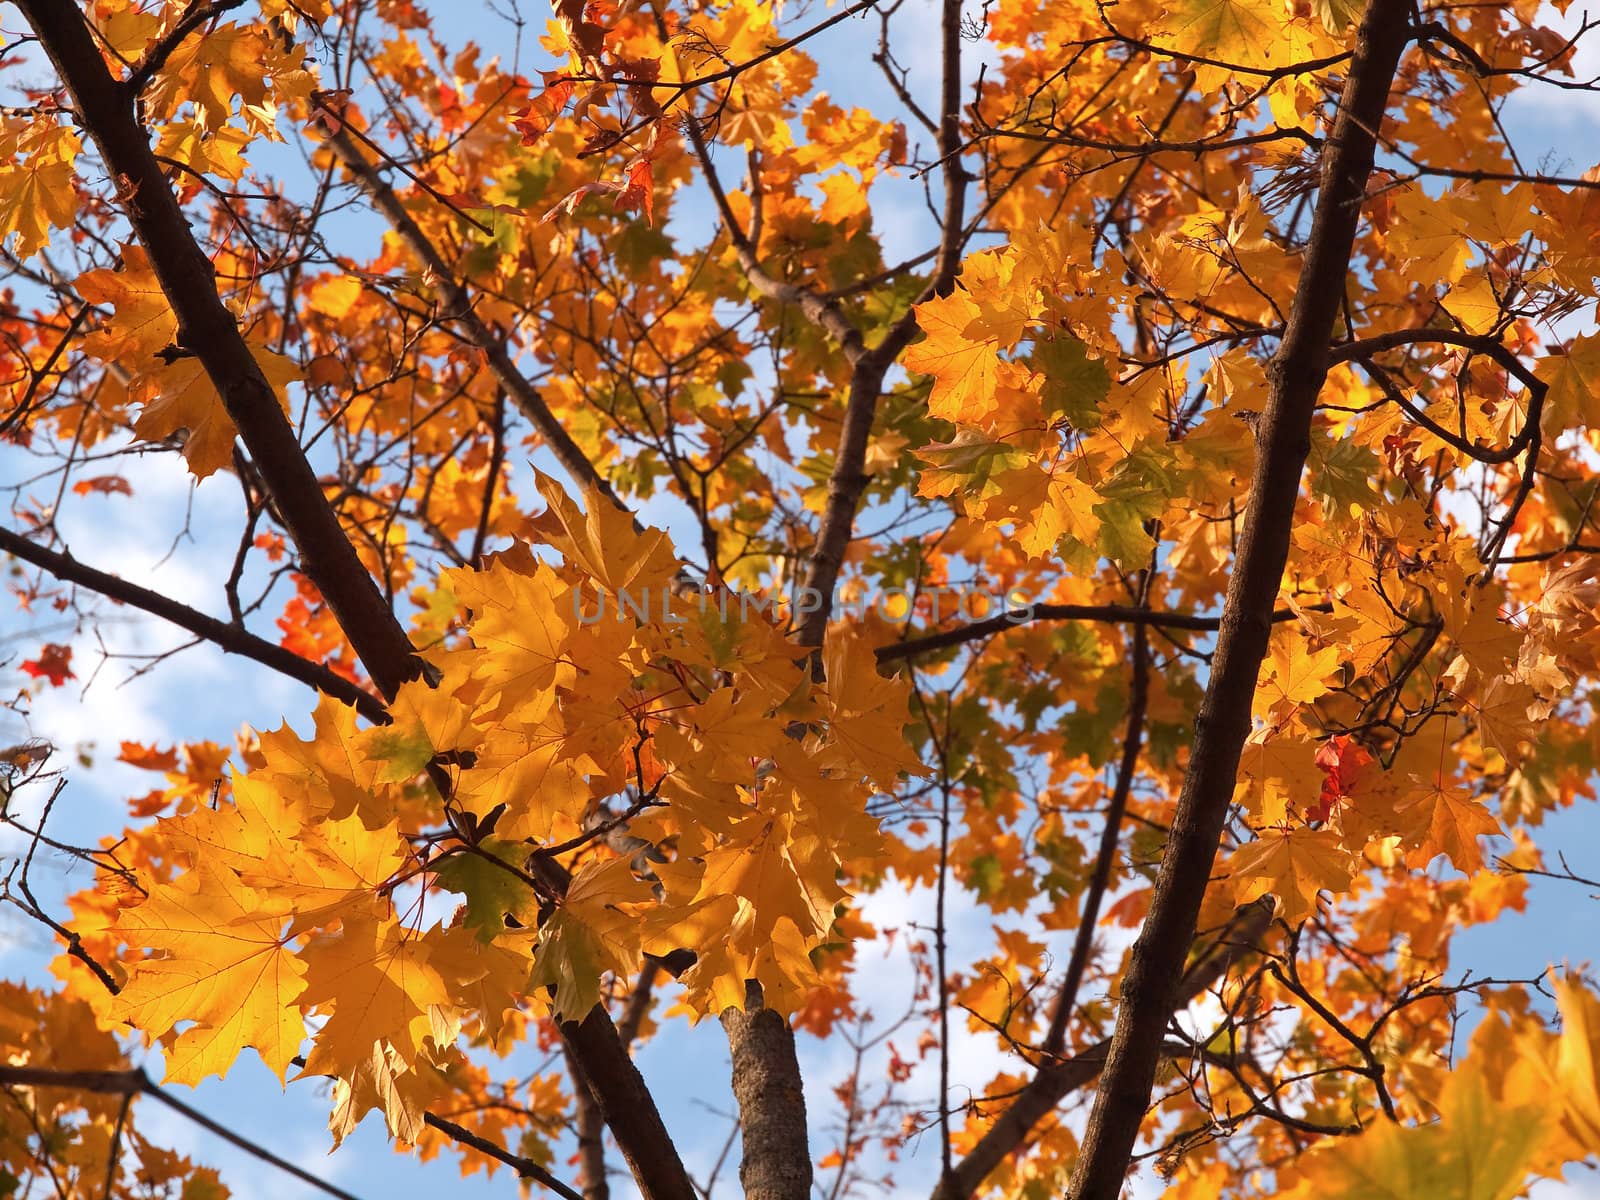 Colorful maple leaves on the tree